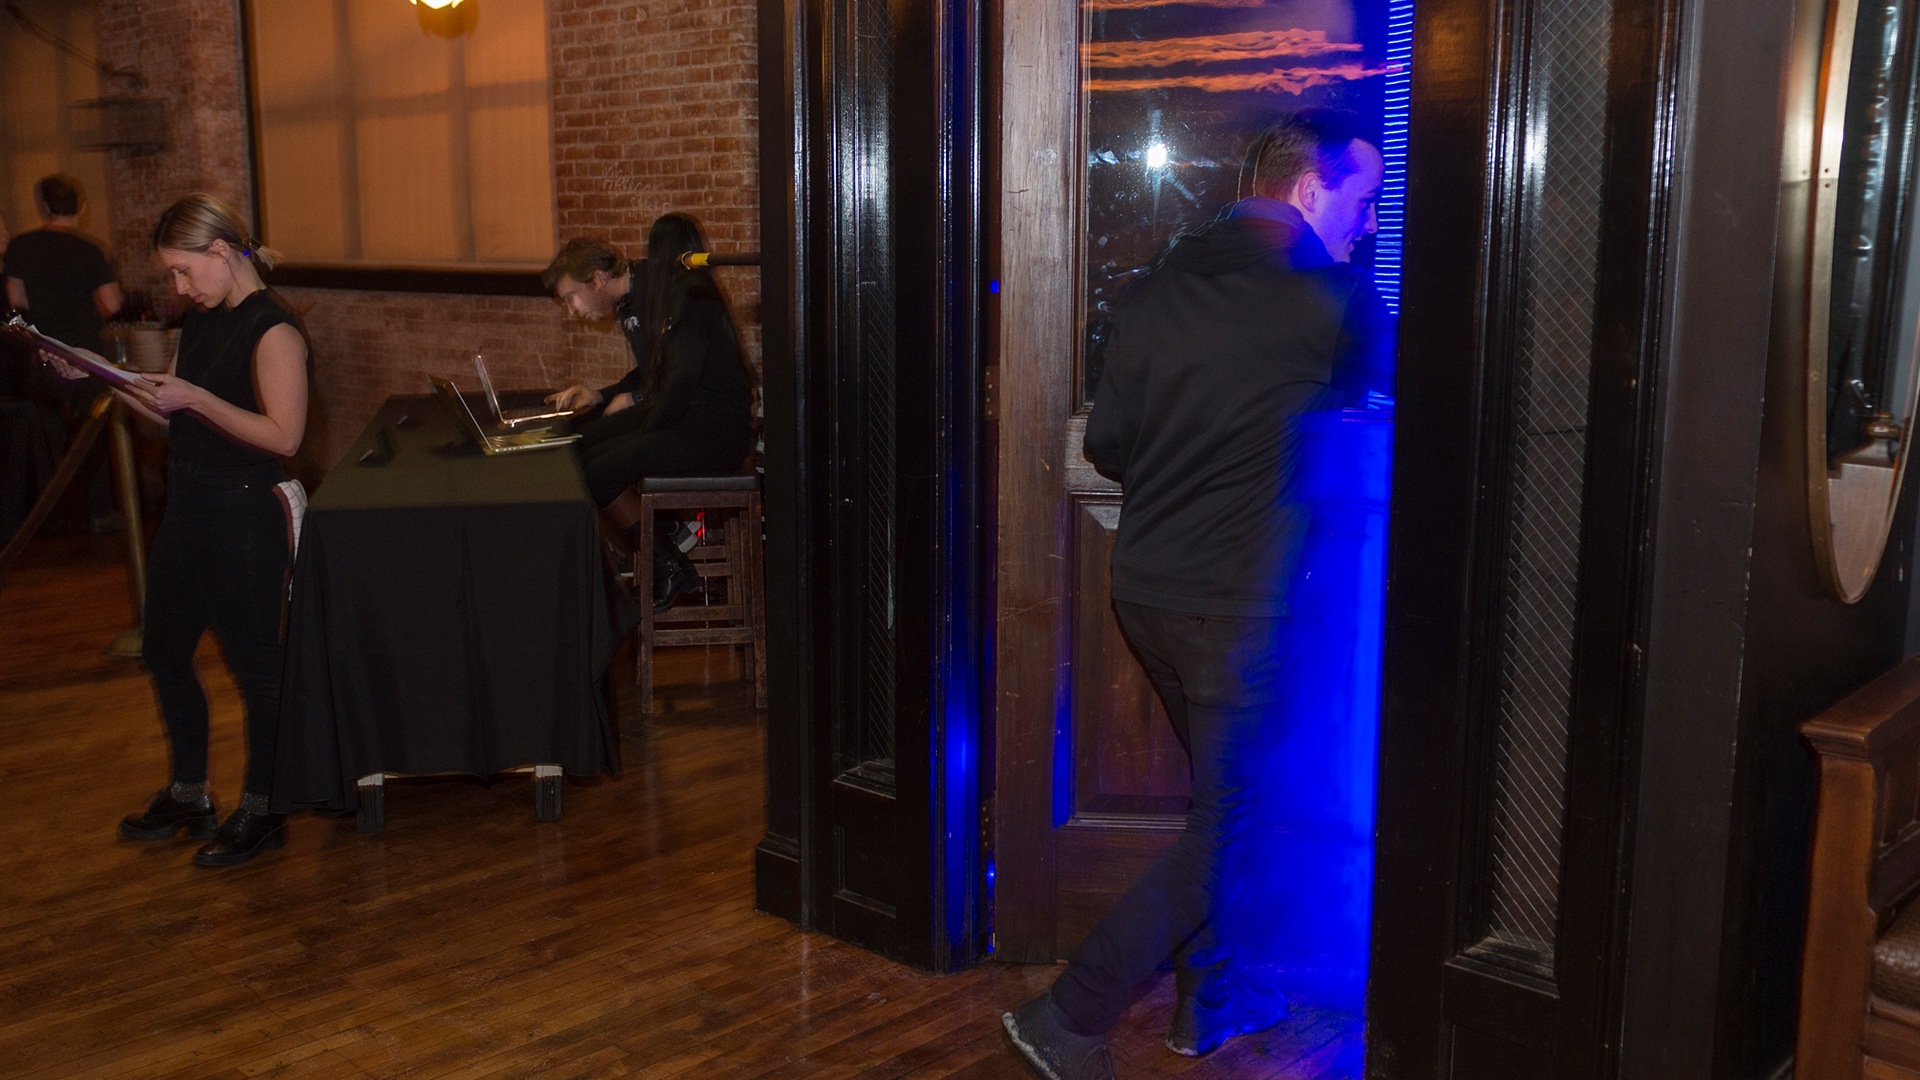 Someone walking through doorway entrance from inside showing deep blue light